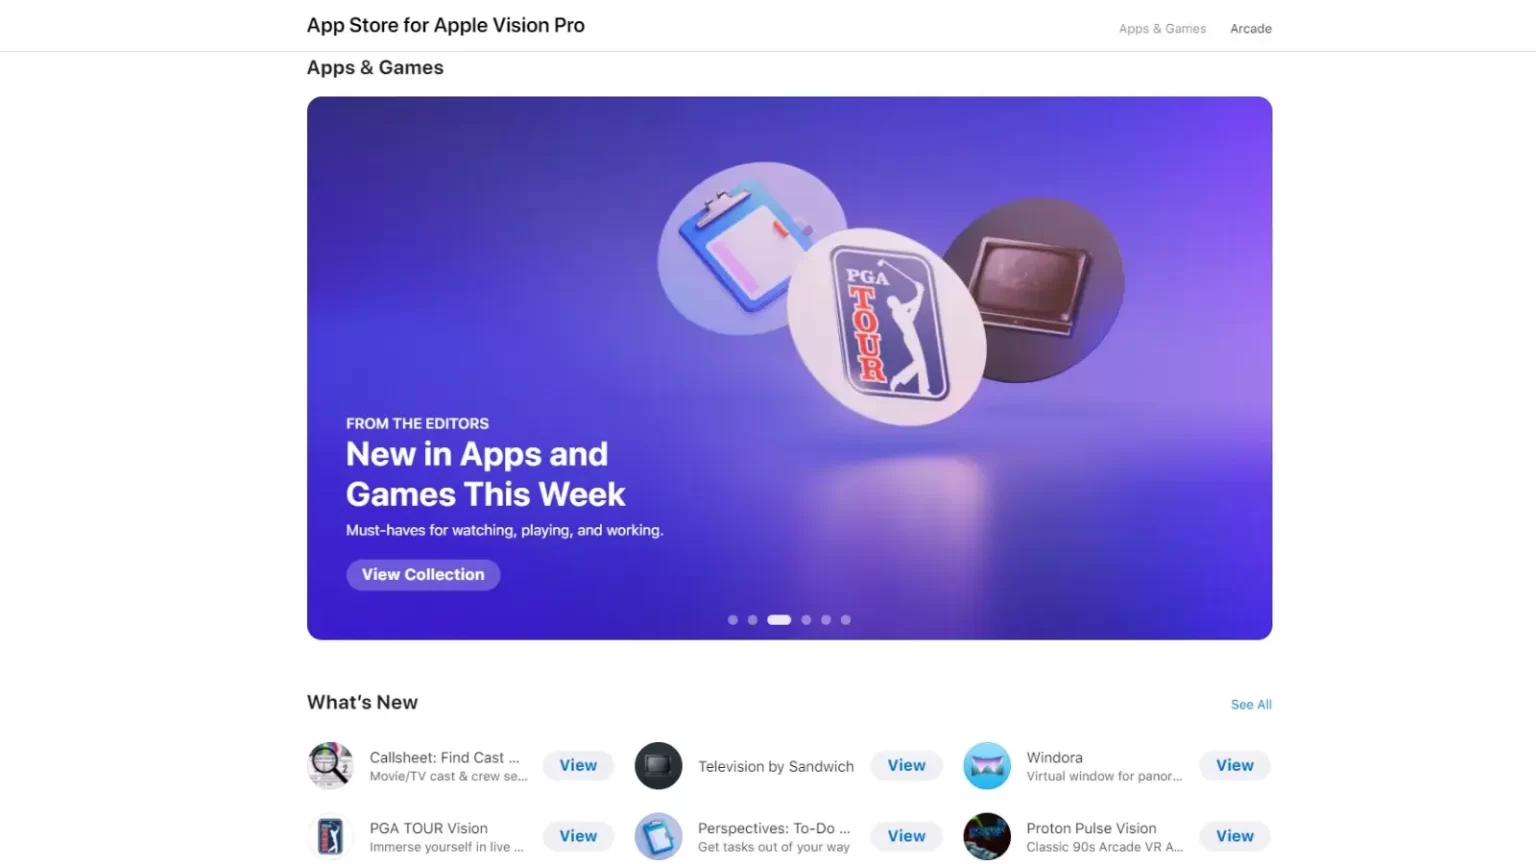 App Store for Apple Vision Pro